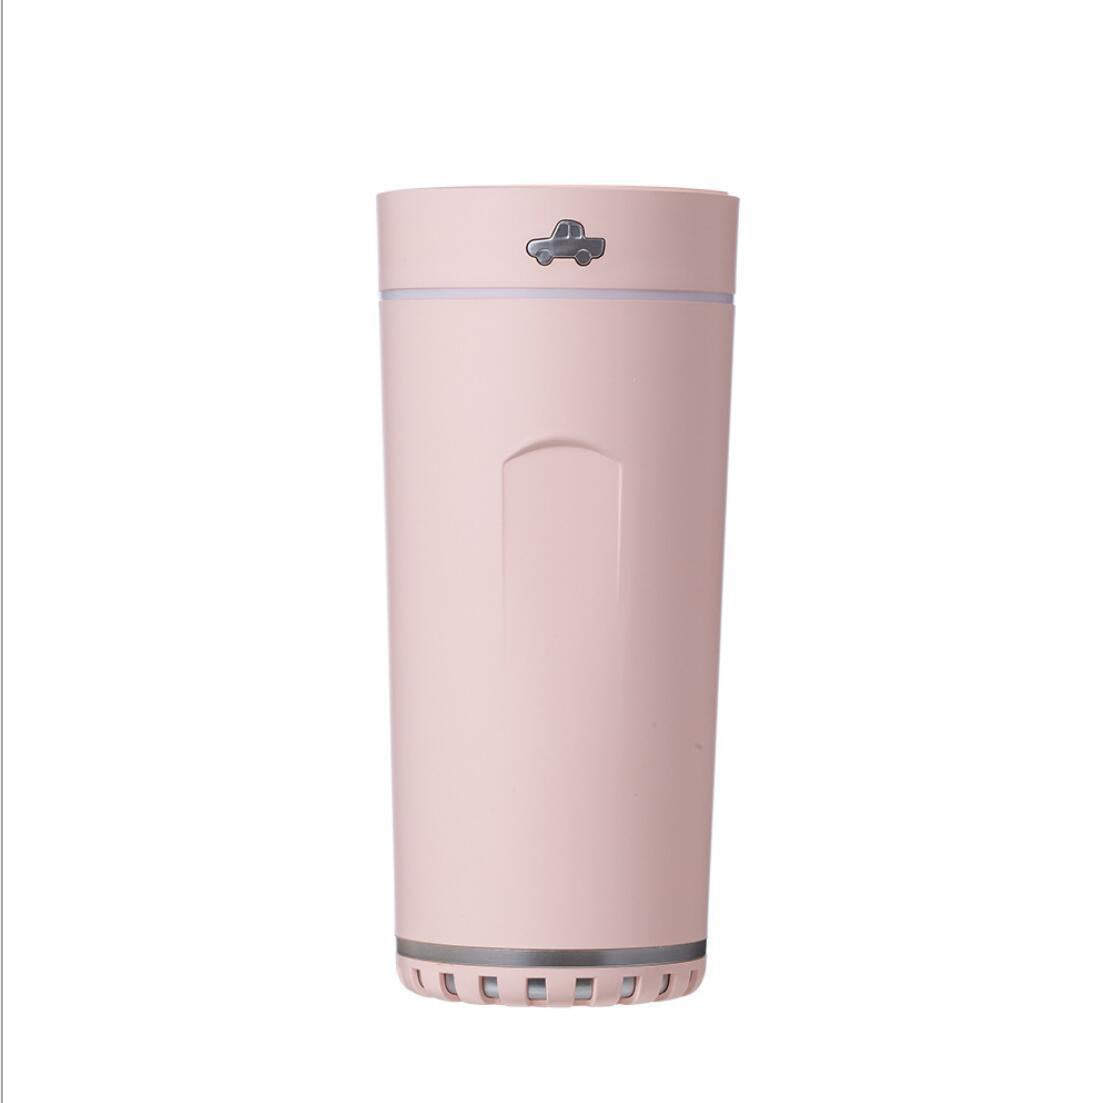 Breath Easy Colorful Cup Humidifier